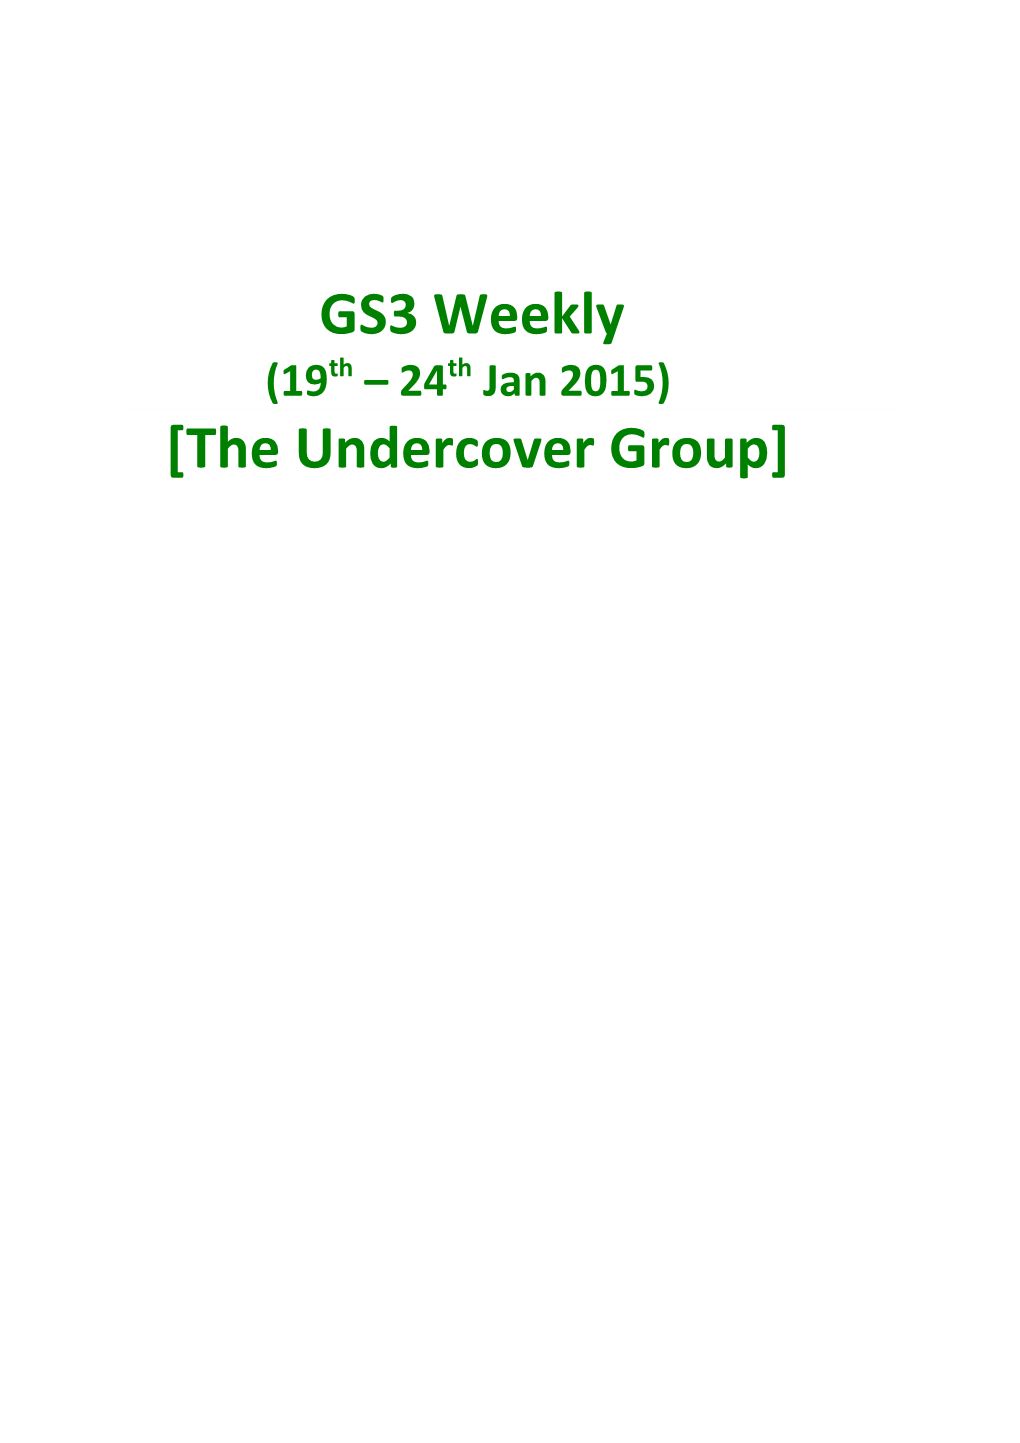 The Undercover Group